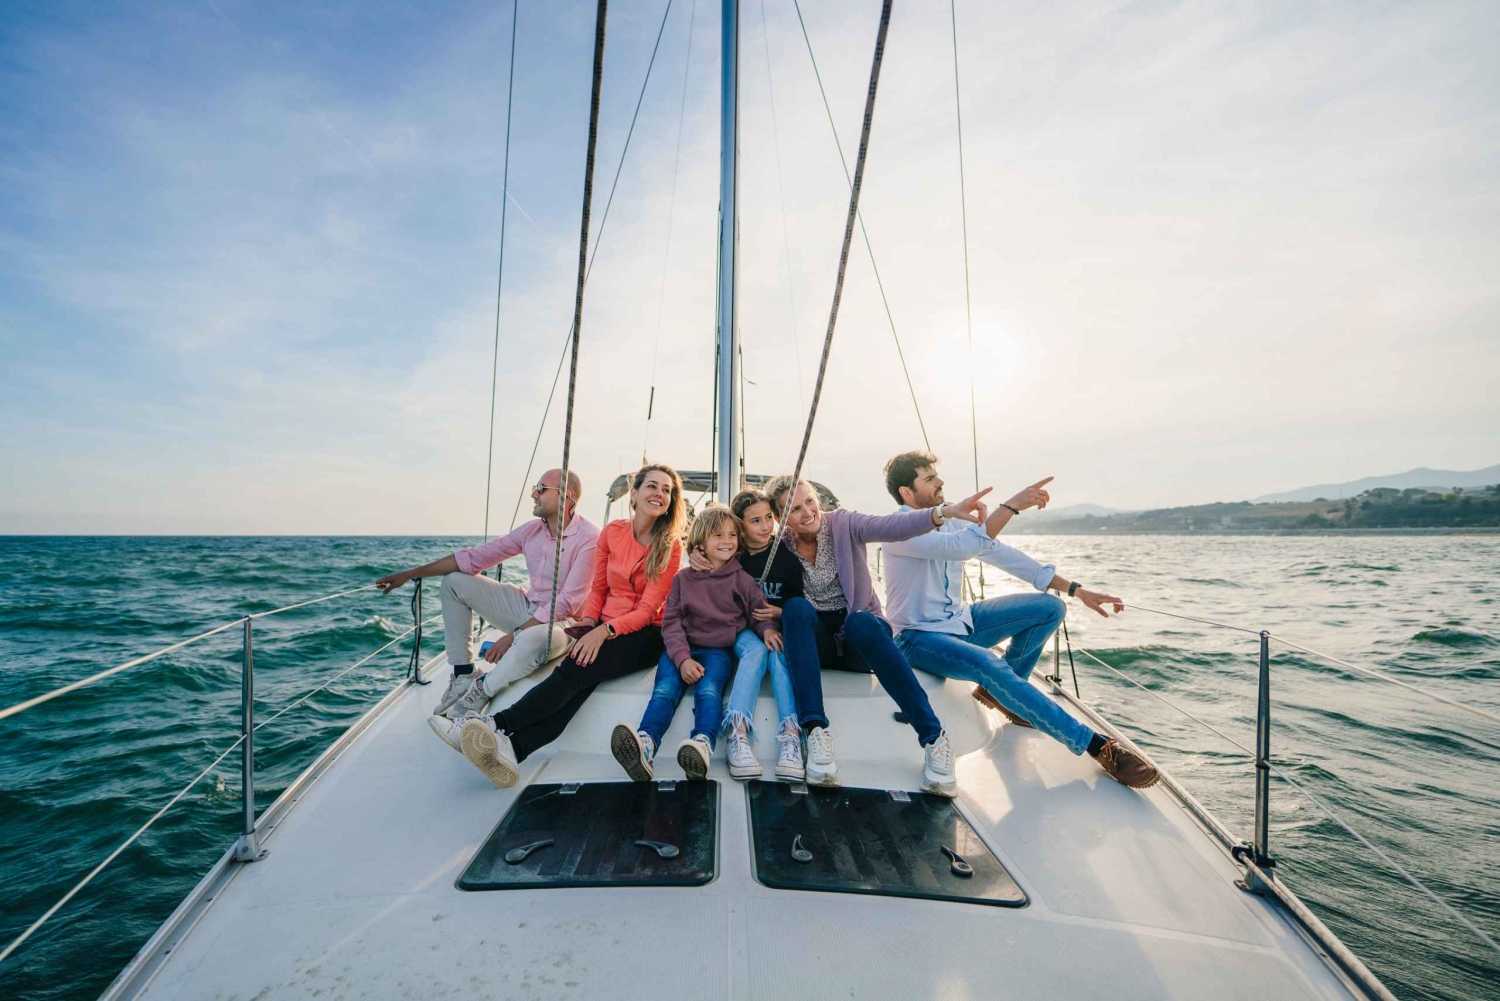 Barcelona: Winery, Paella Cooking Class & Sailing Day Trip